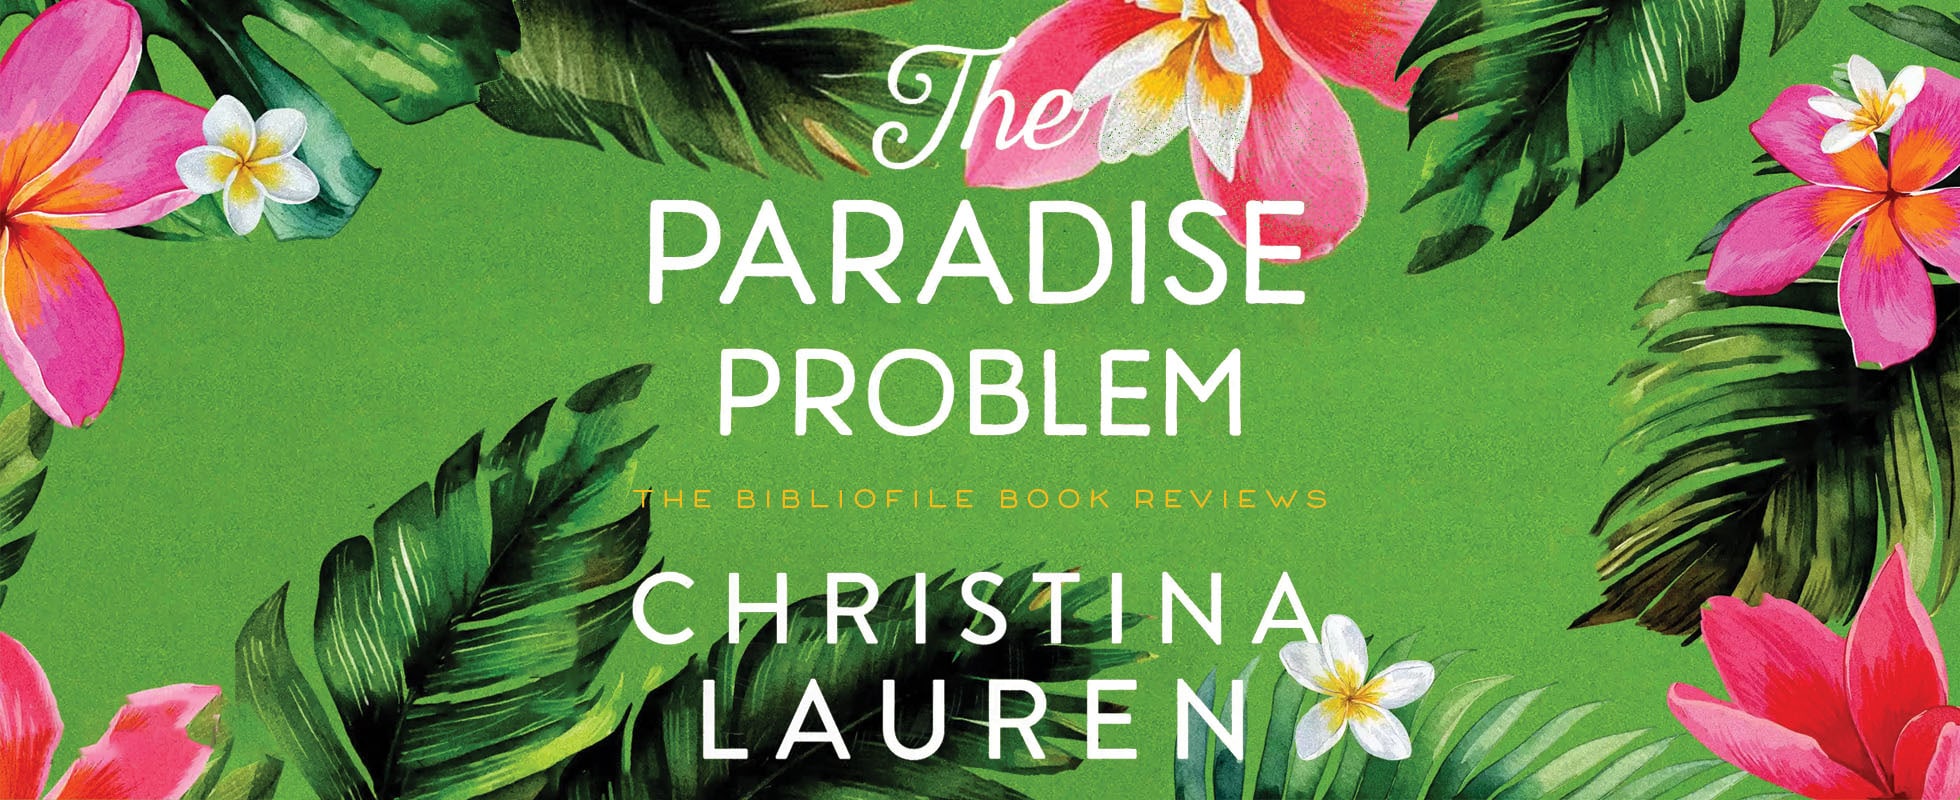 The Paradise Problem by Christina Lauren, book review plot summary synopsis recap discussion spoilers